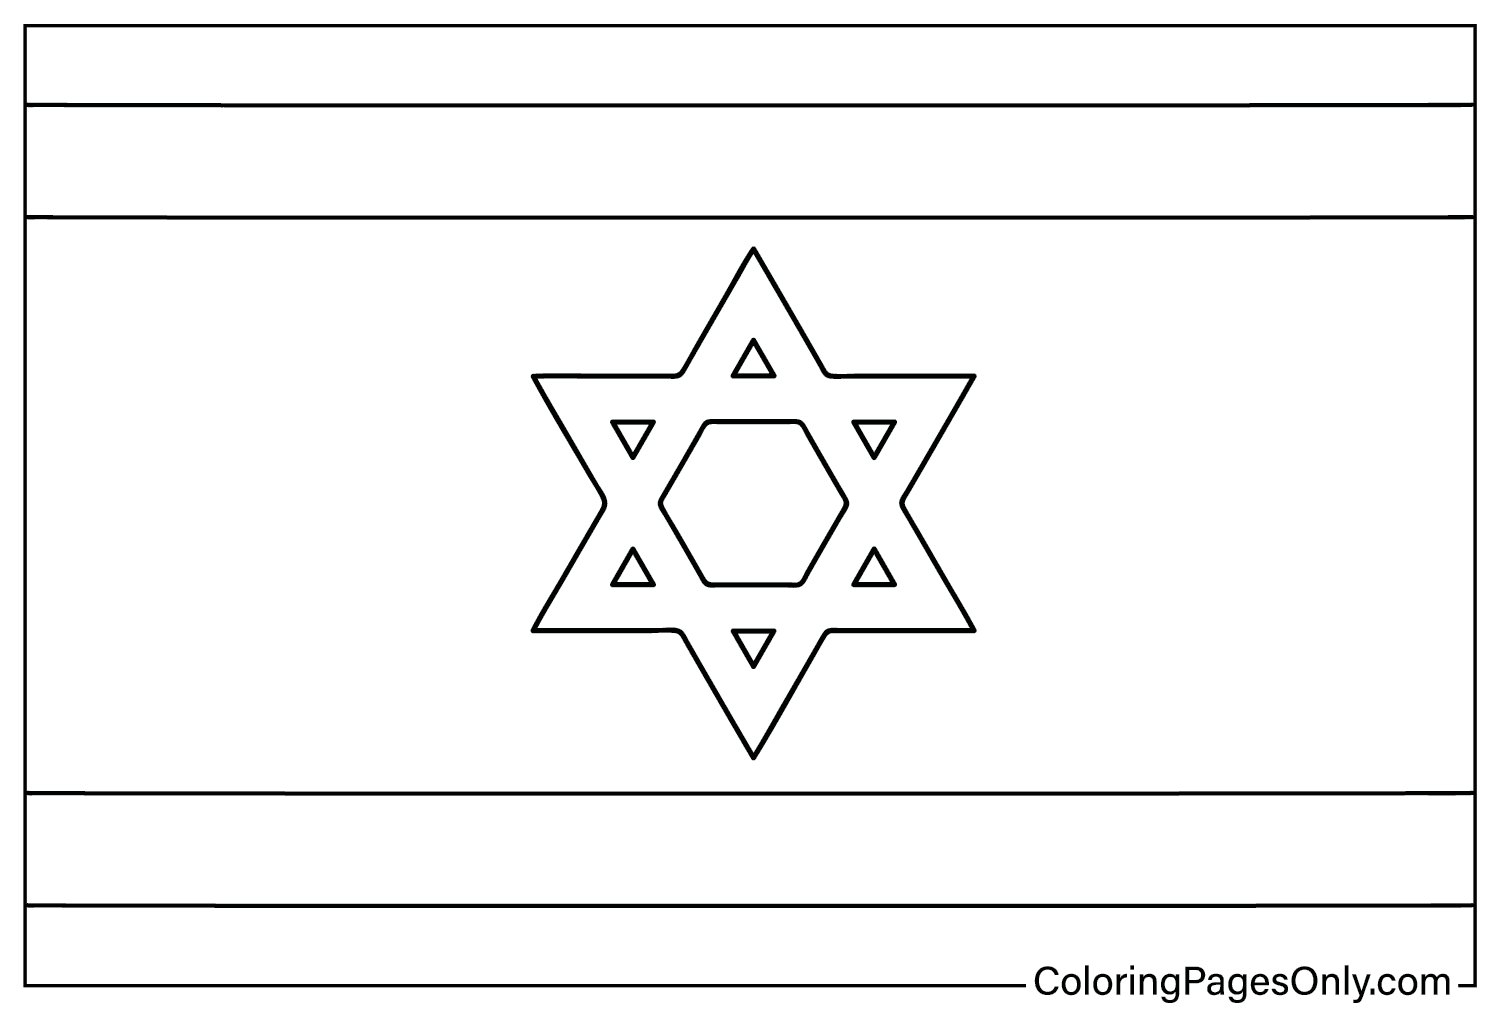 Coloring Page Flag Israel from Israel